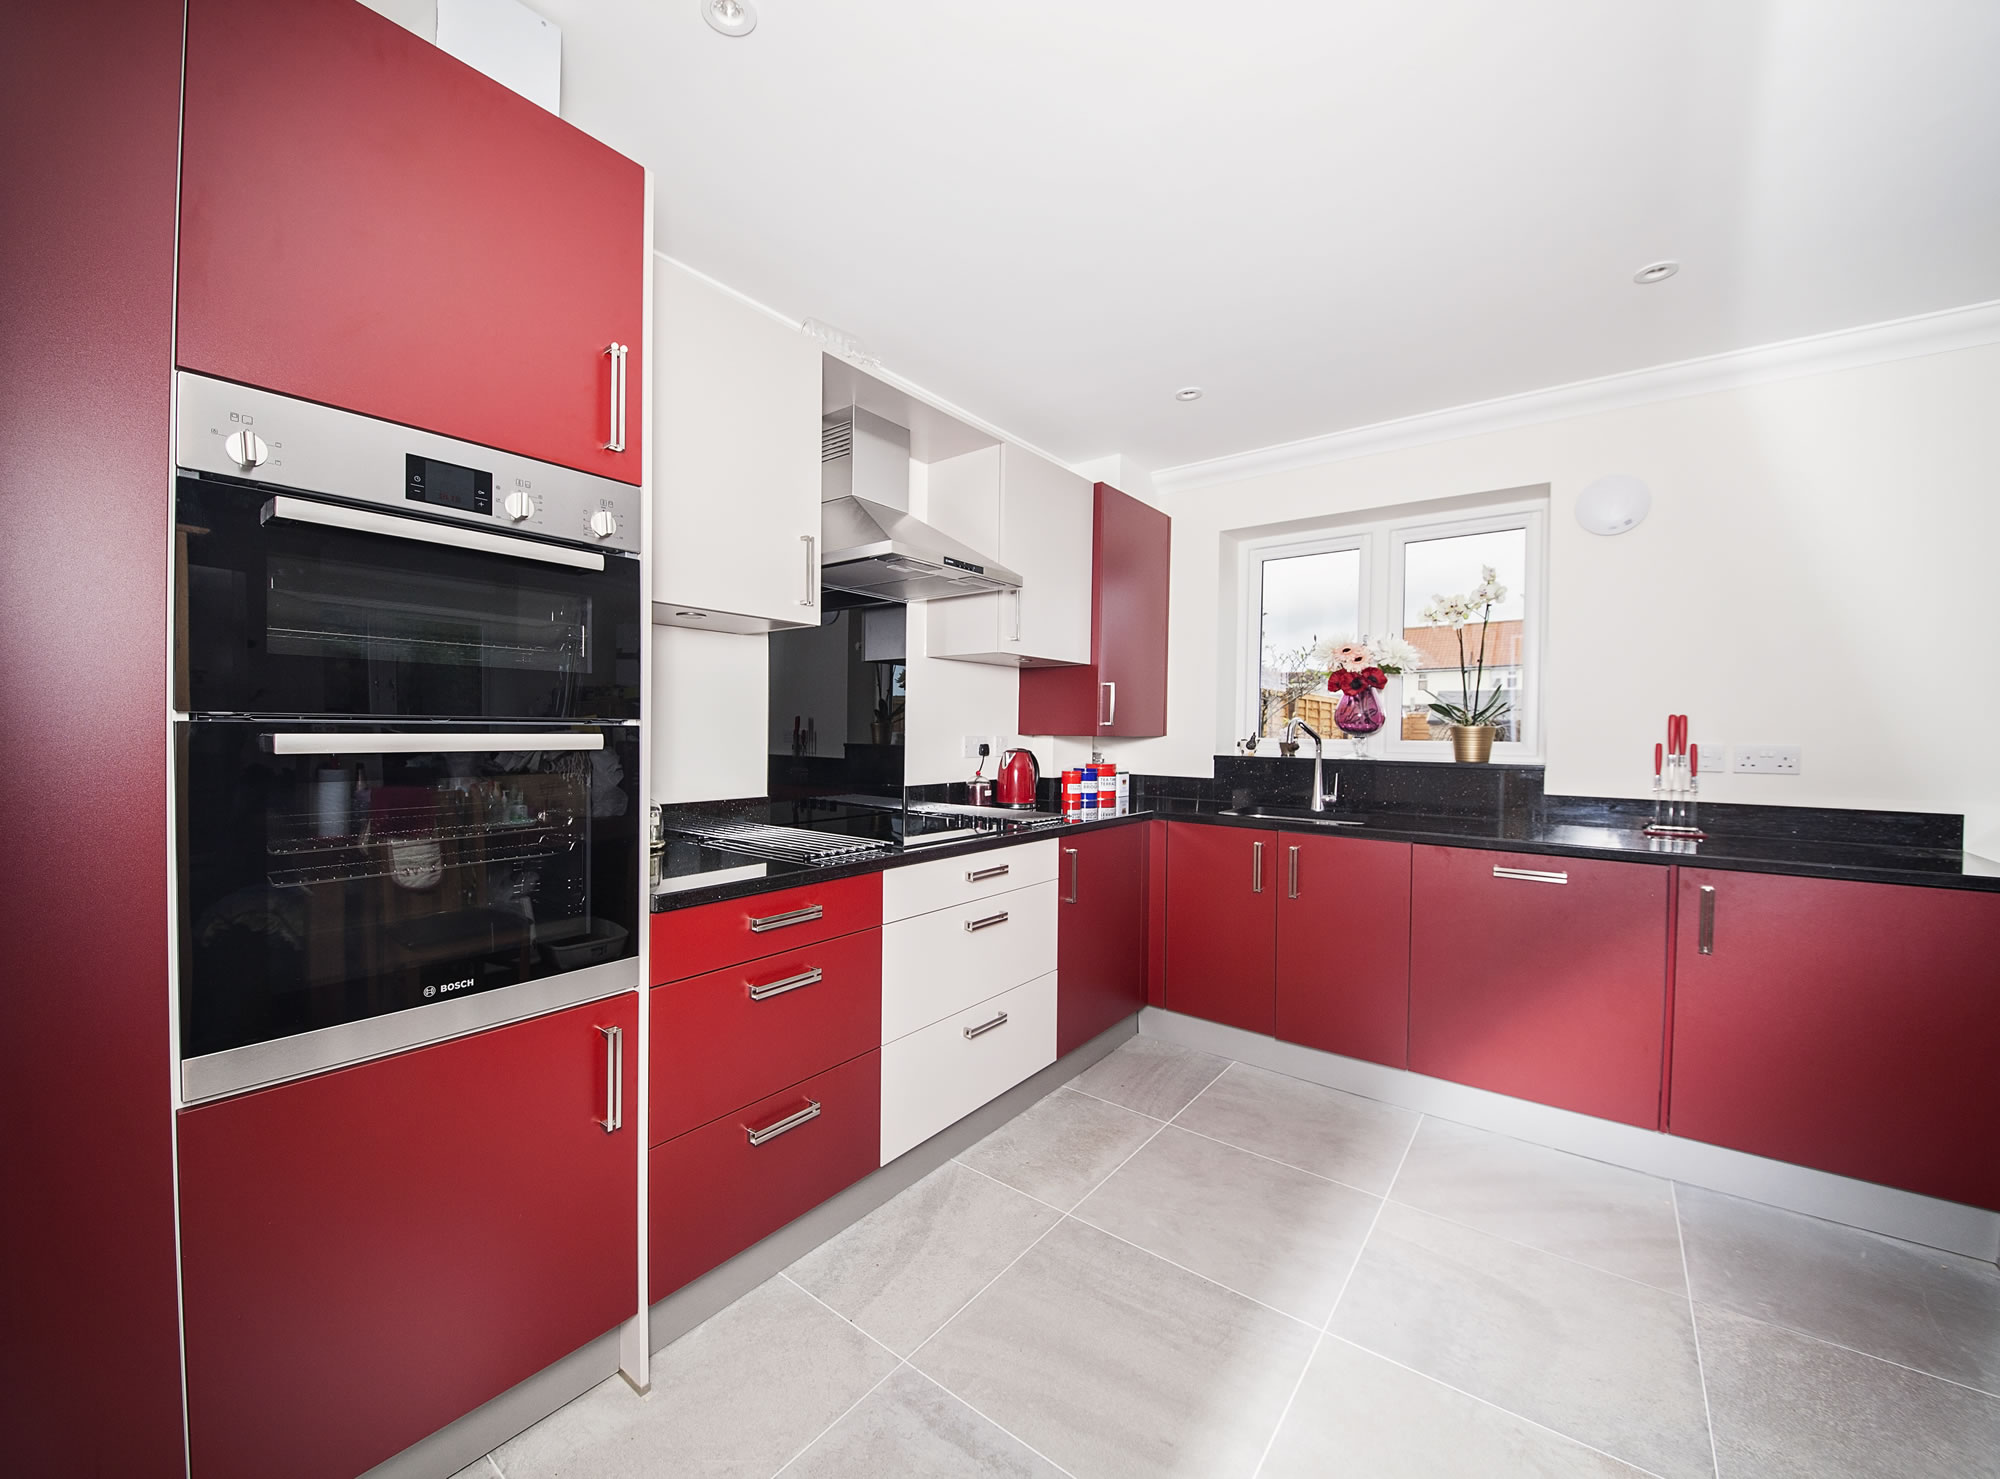 Fitted kitchen at Weston mews complete with fitted appliances.